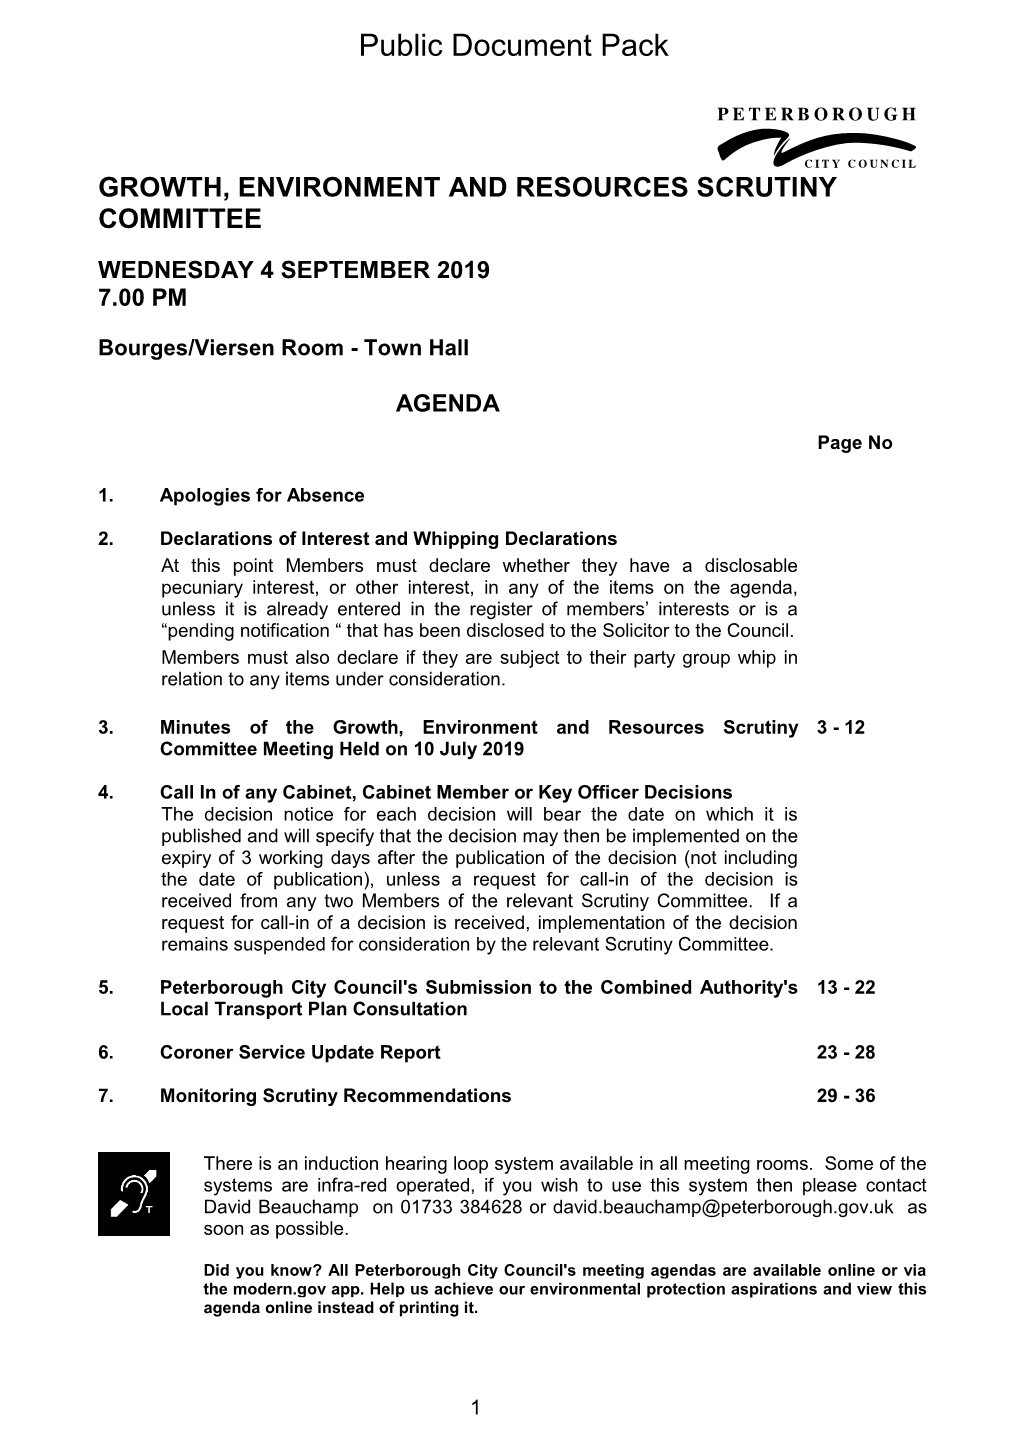 (Public Pack)Agenda Document for Growth, Environment And